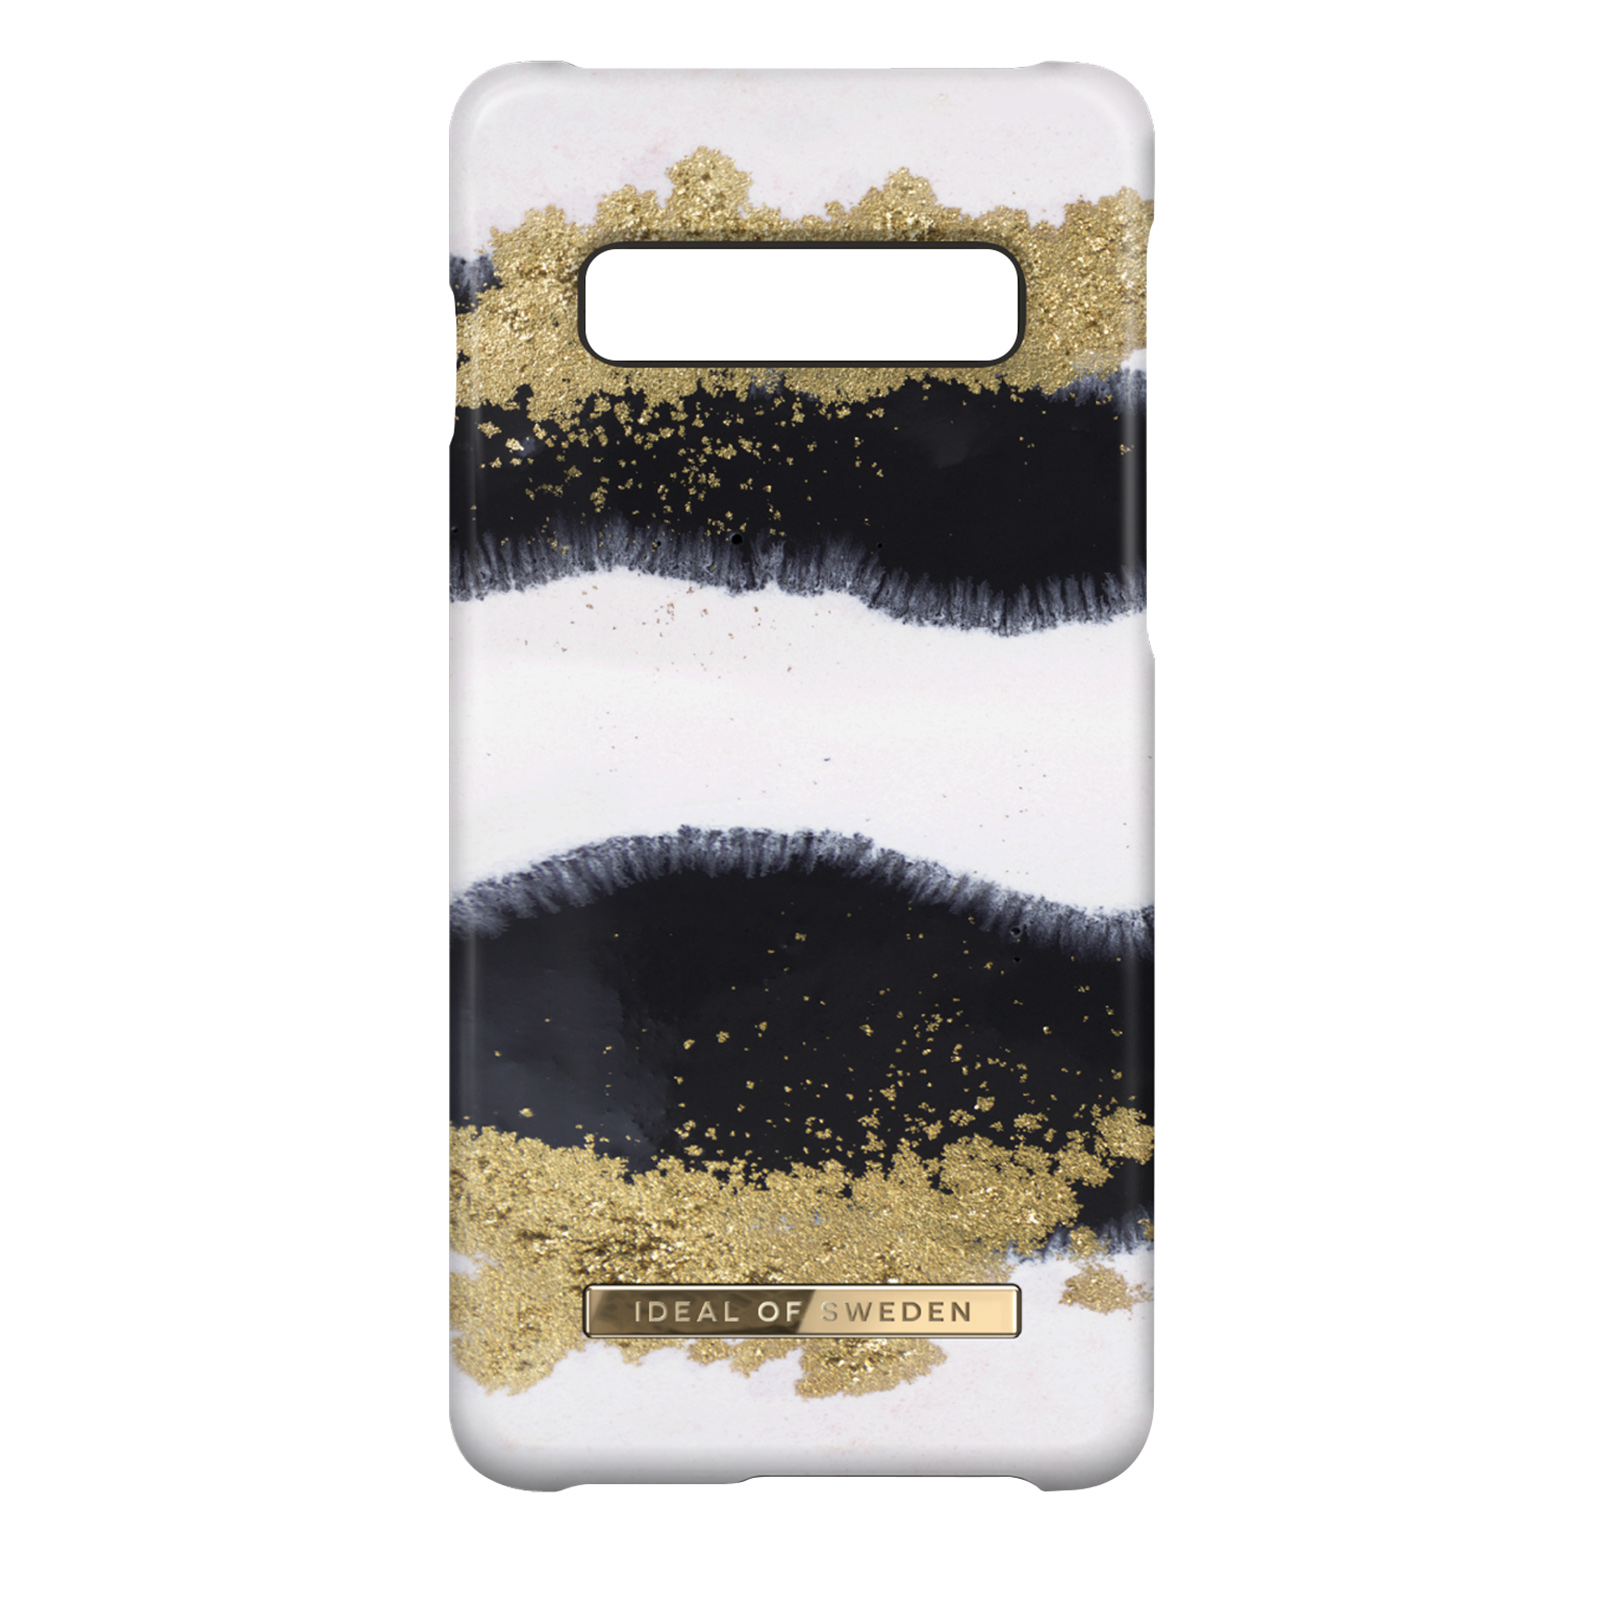 S10, SWEDEN Samsung, Gold IDEAL Licorice Gleaming Series, OF Backcover, Galaxy